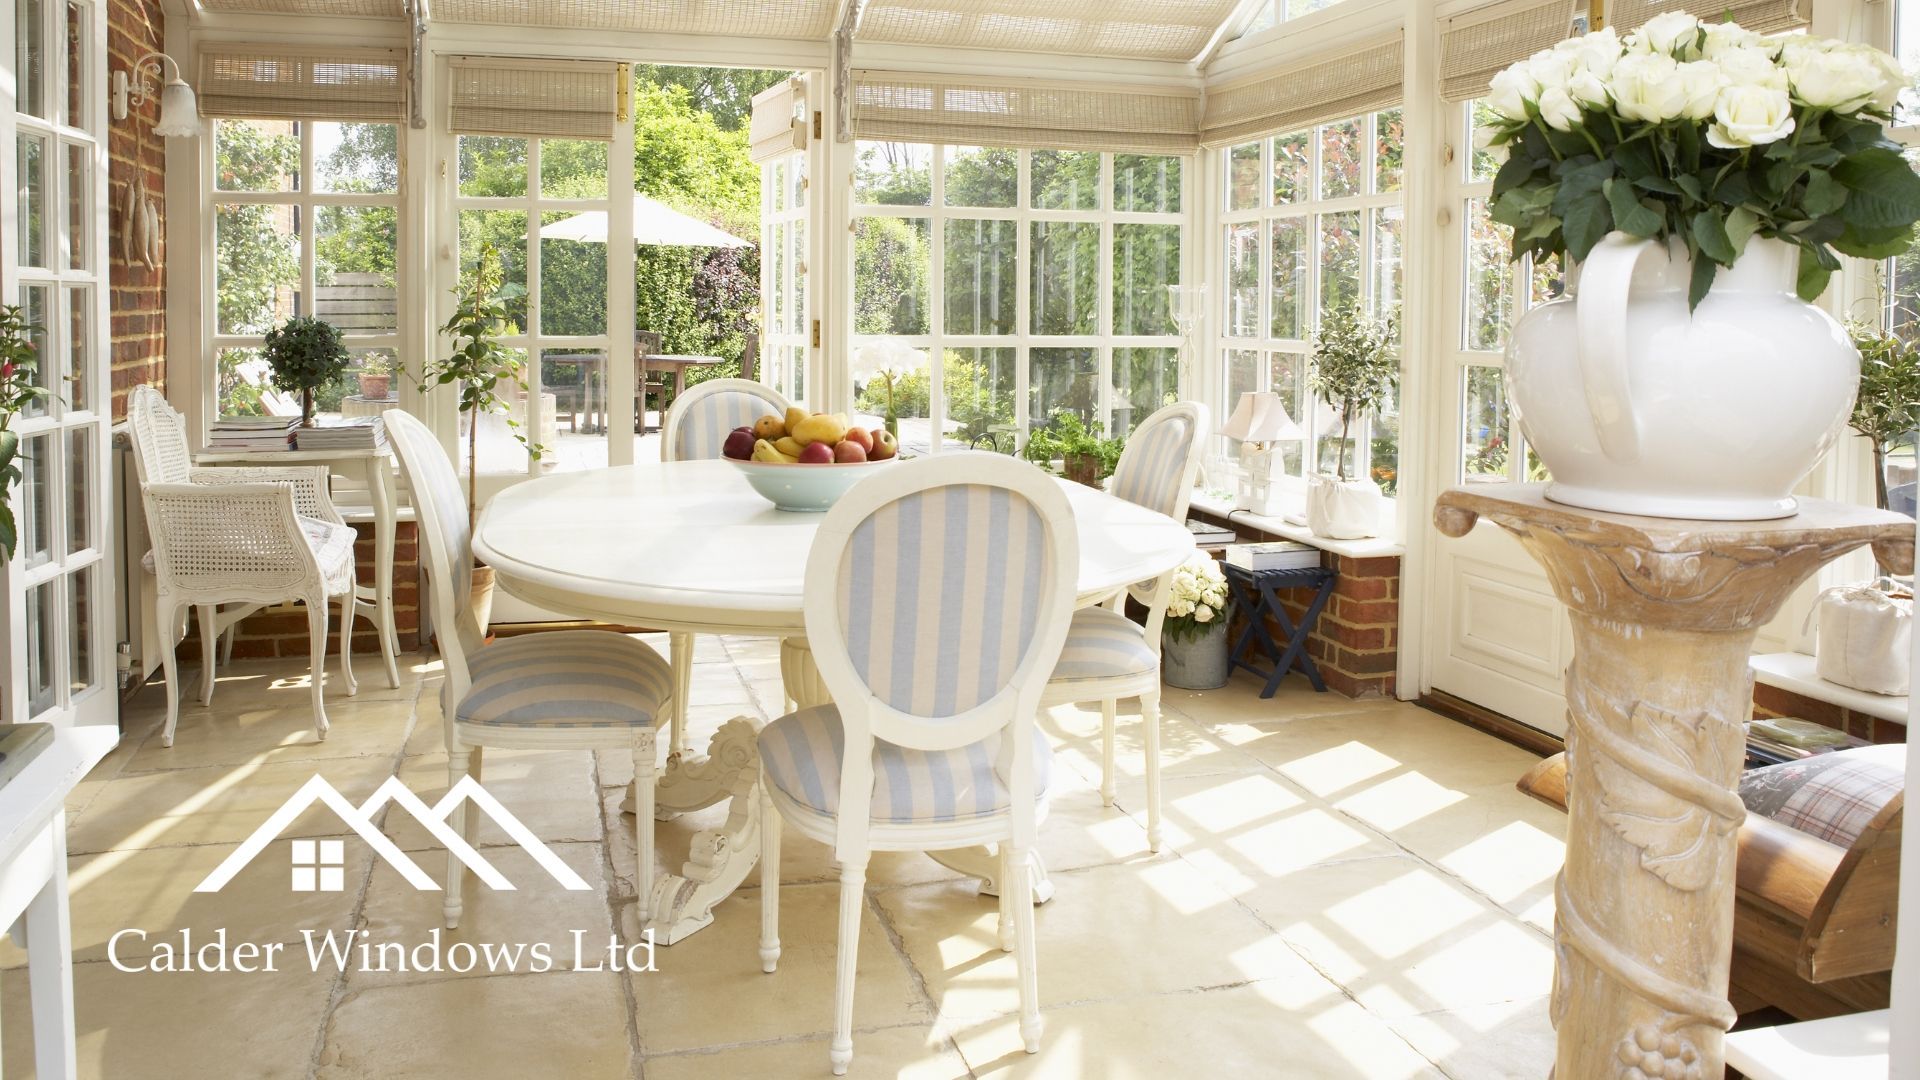 Looking for conservatory furniture ideas? We've got you covered. Explore 10 types of furniture that can turn your conservatory into a domestic haven.
